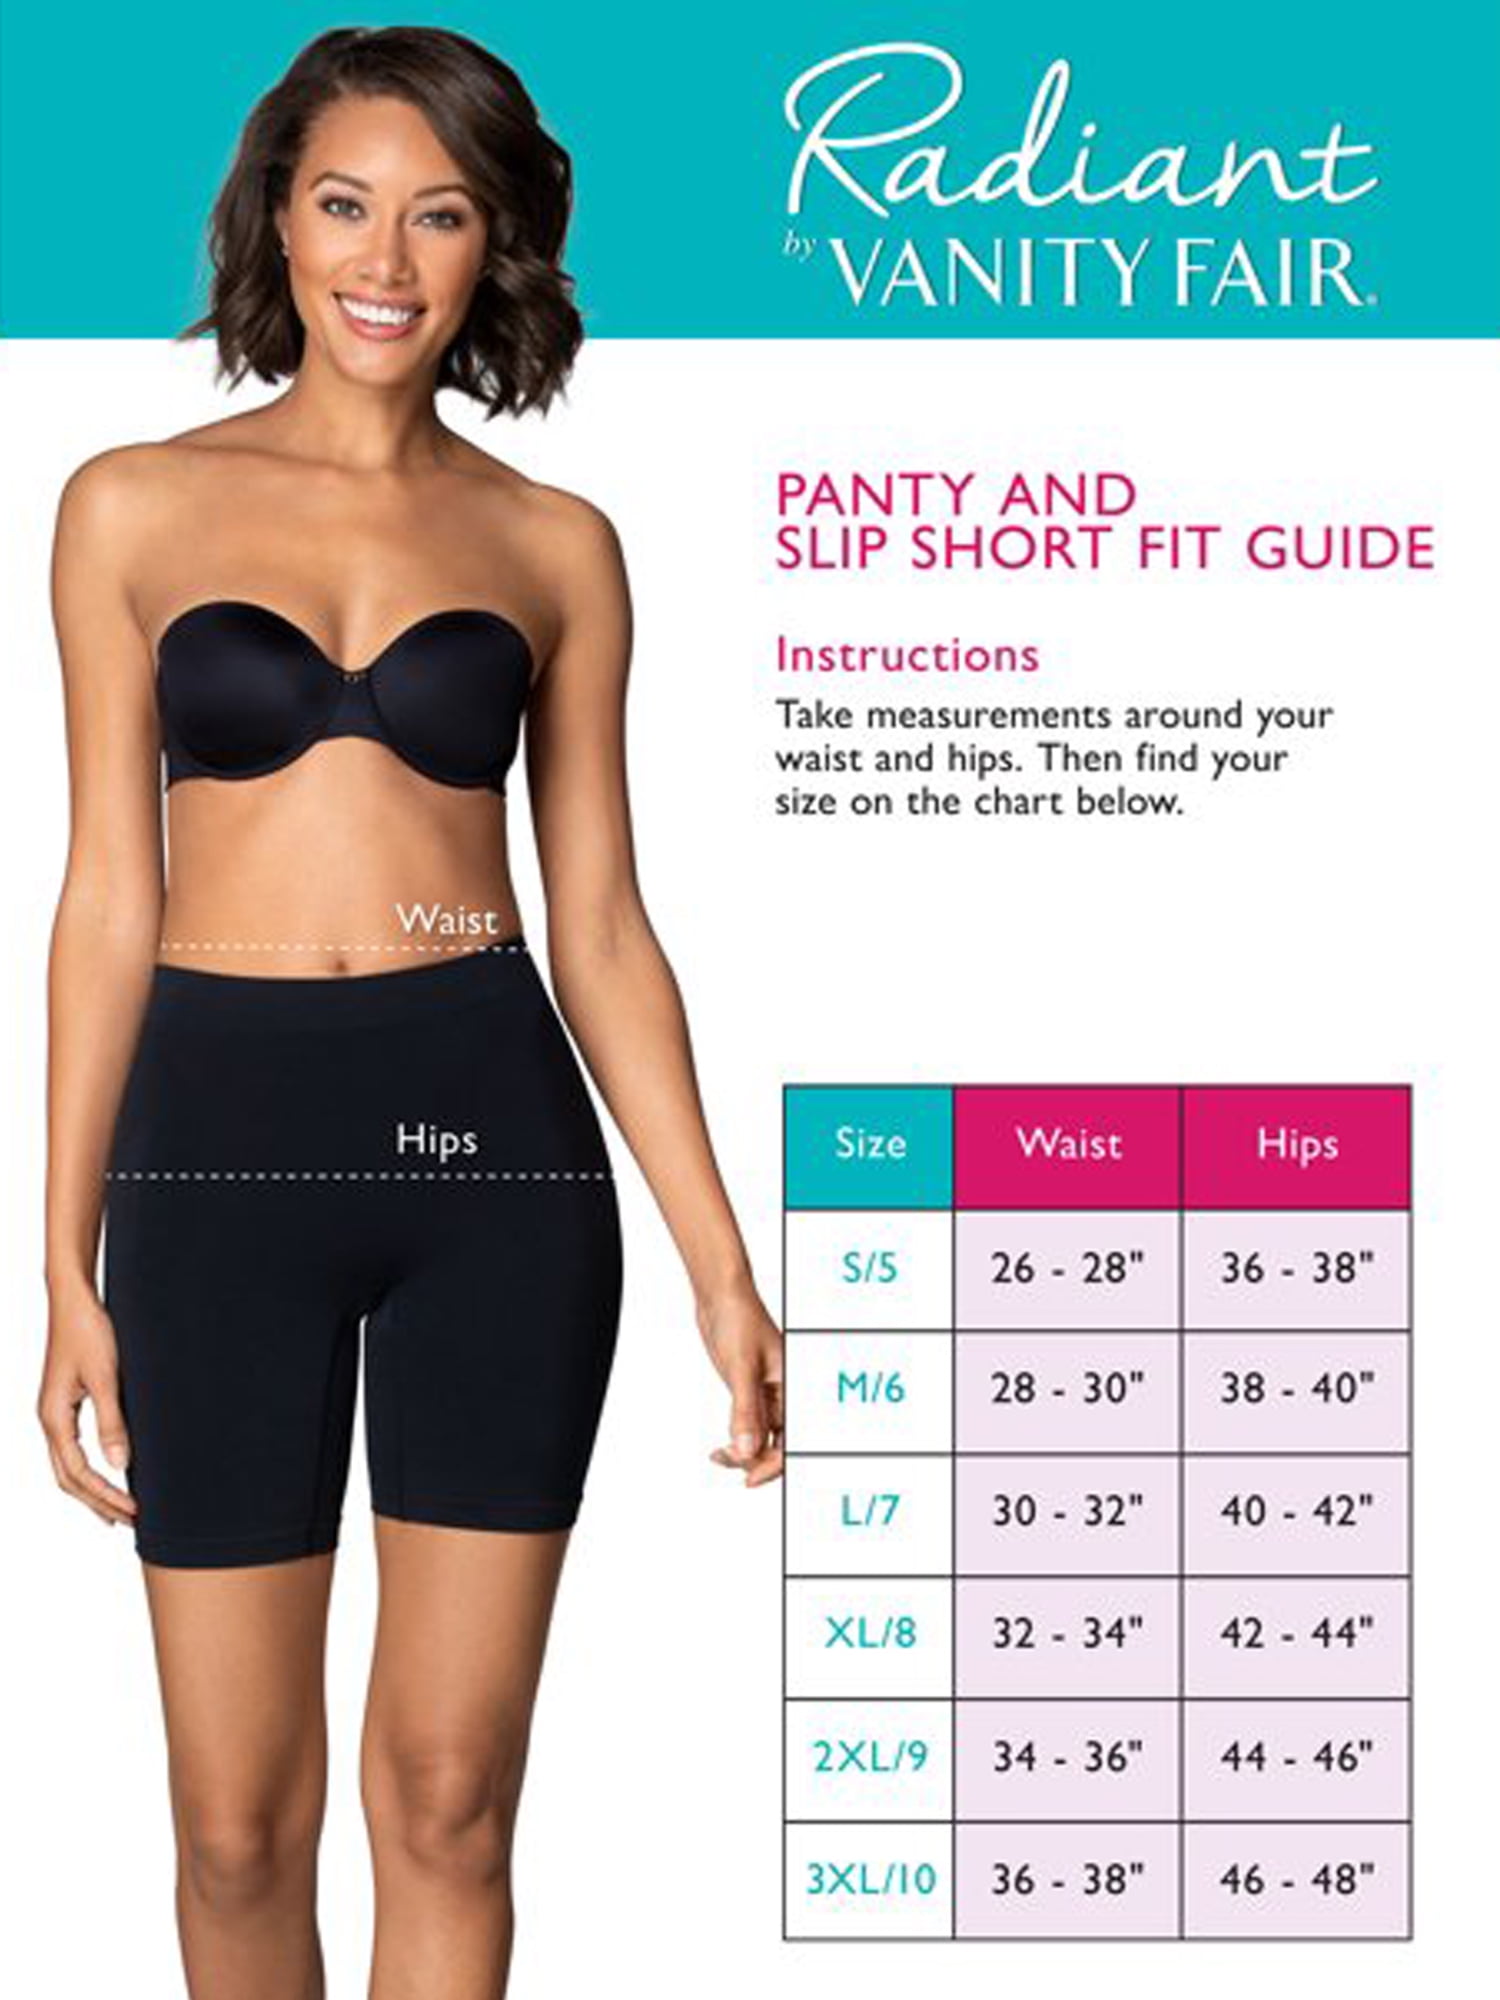 Vanity Fair Radiant Collection Women's Invisible Edge Smoothing Slip Short